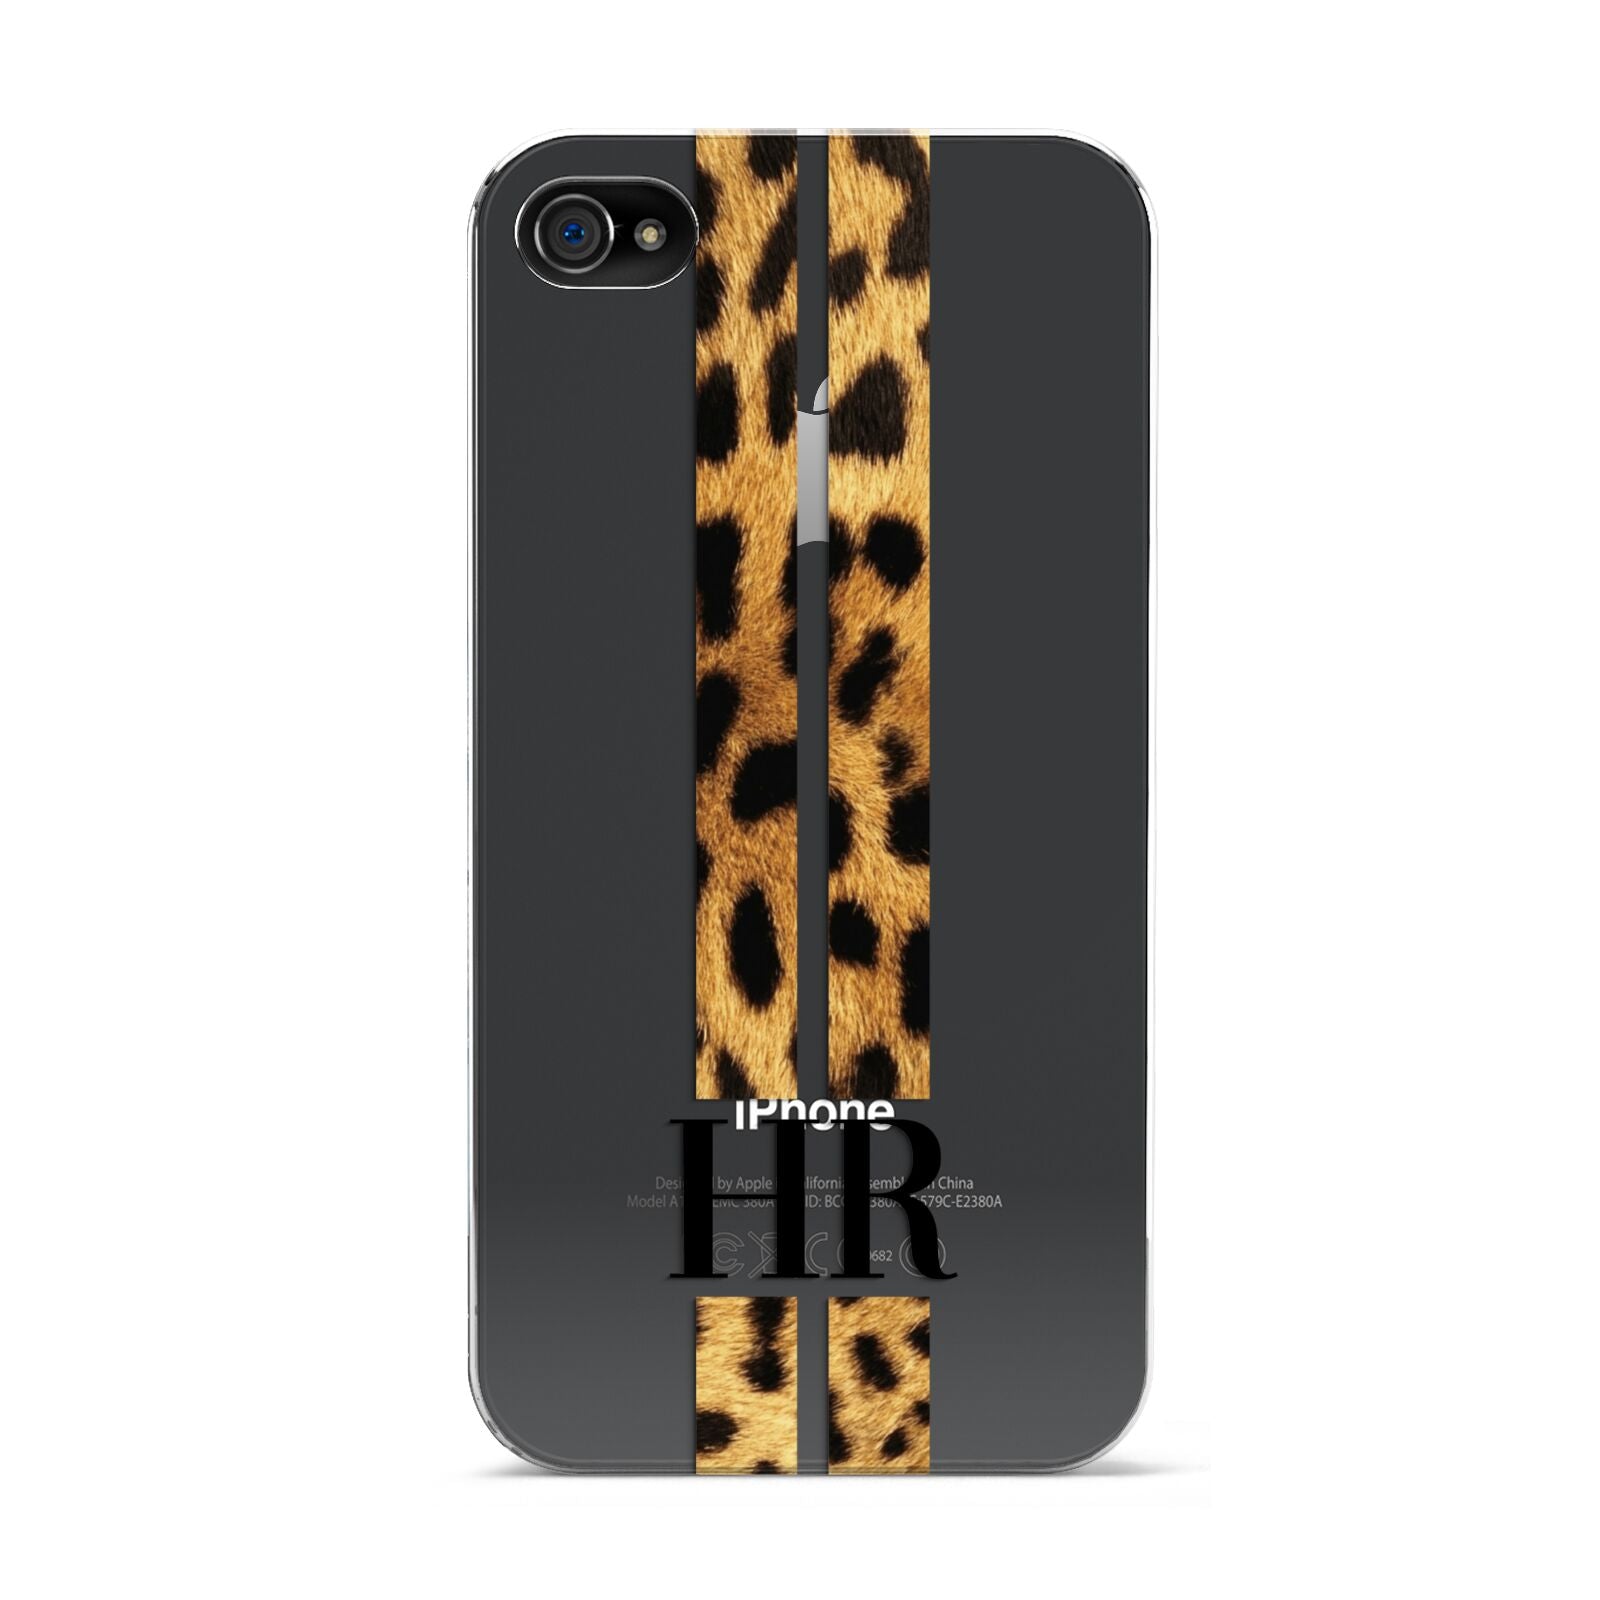 Initialled Leopard Print Stripes Apple iPhone 4s Case